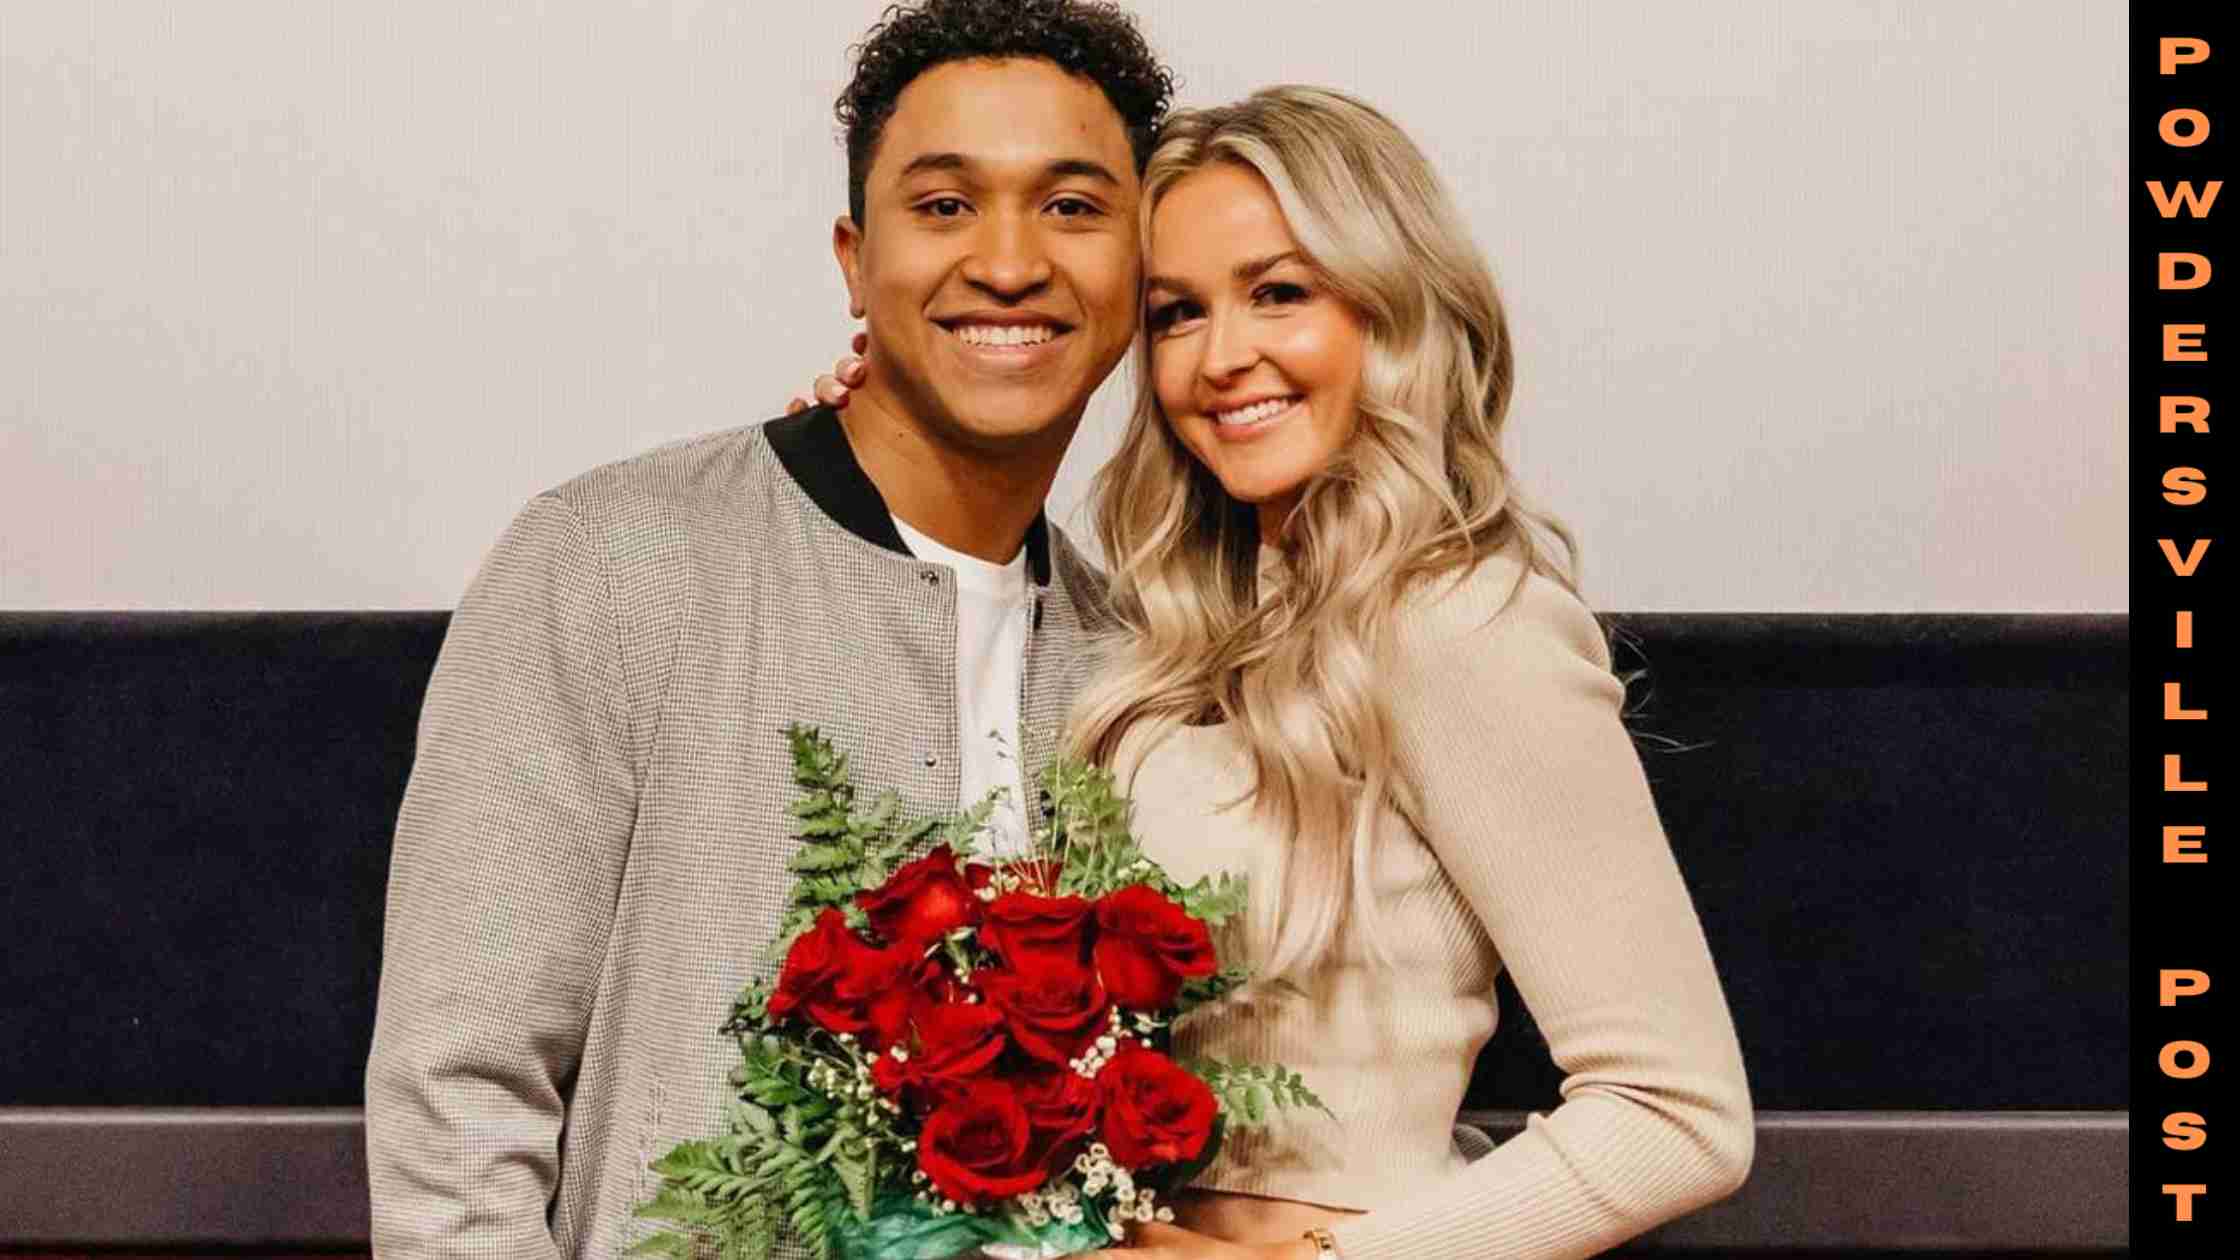 Reality Stars Brandon Armstrong and Brylee Ivers Talks About Their Relationship And Recent Engagement